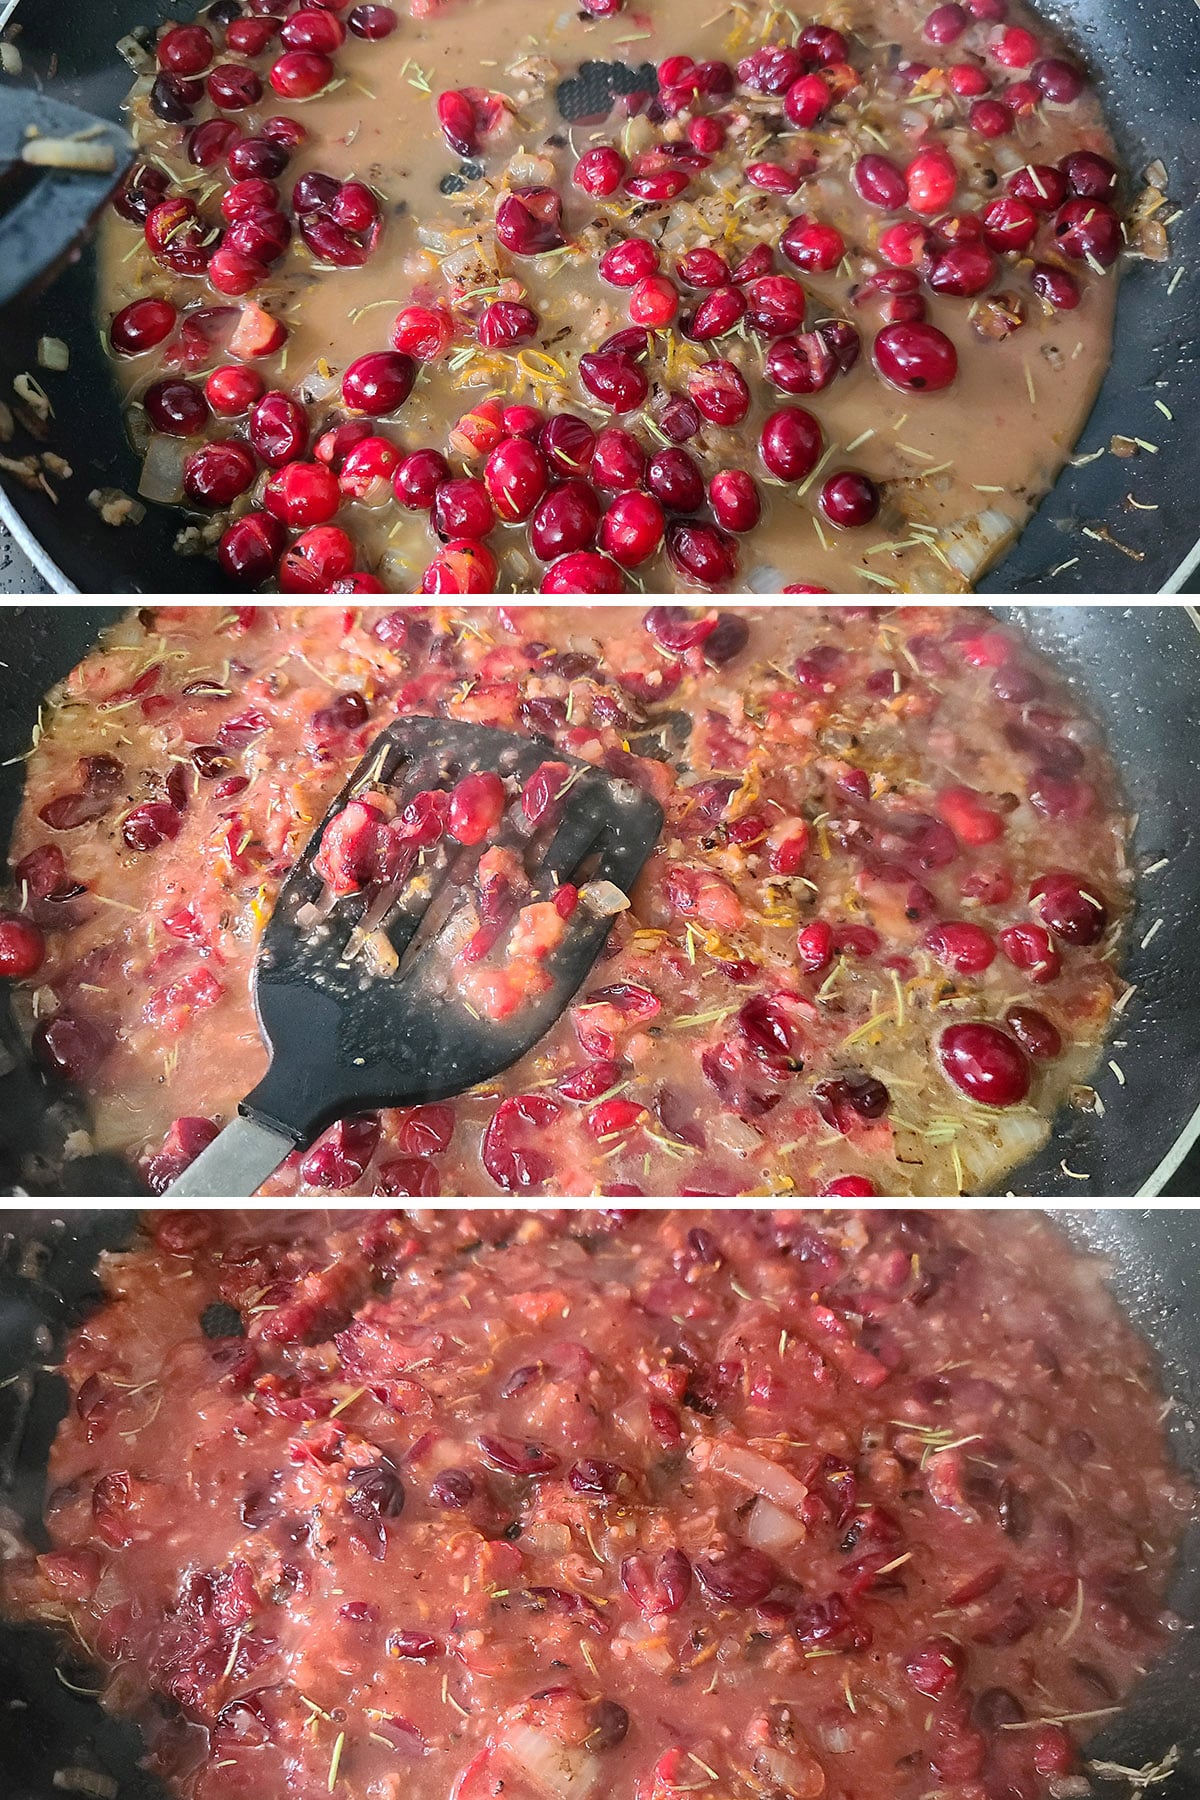 a 3 part image showing the progression of the cranberries breaking down.